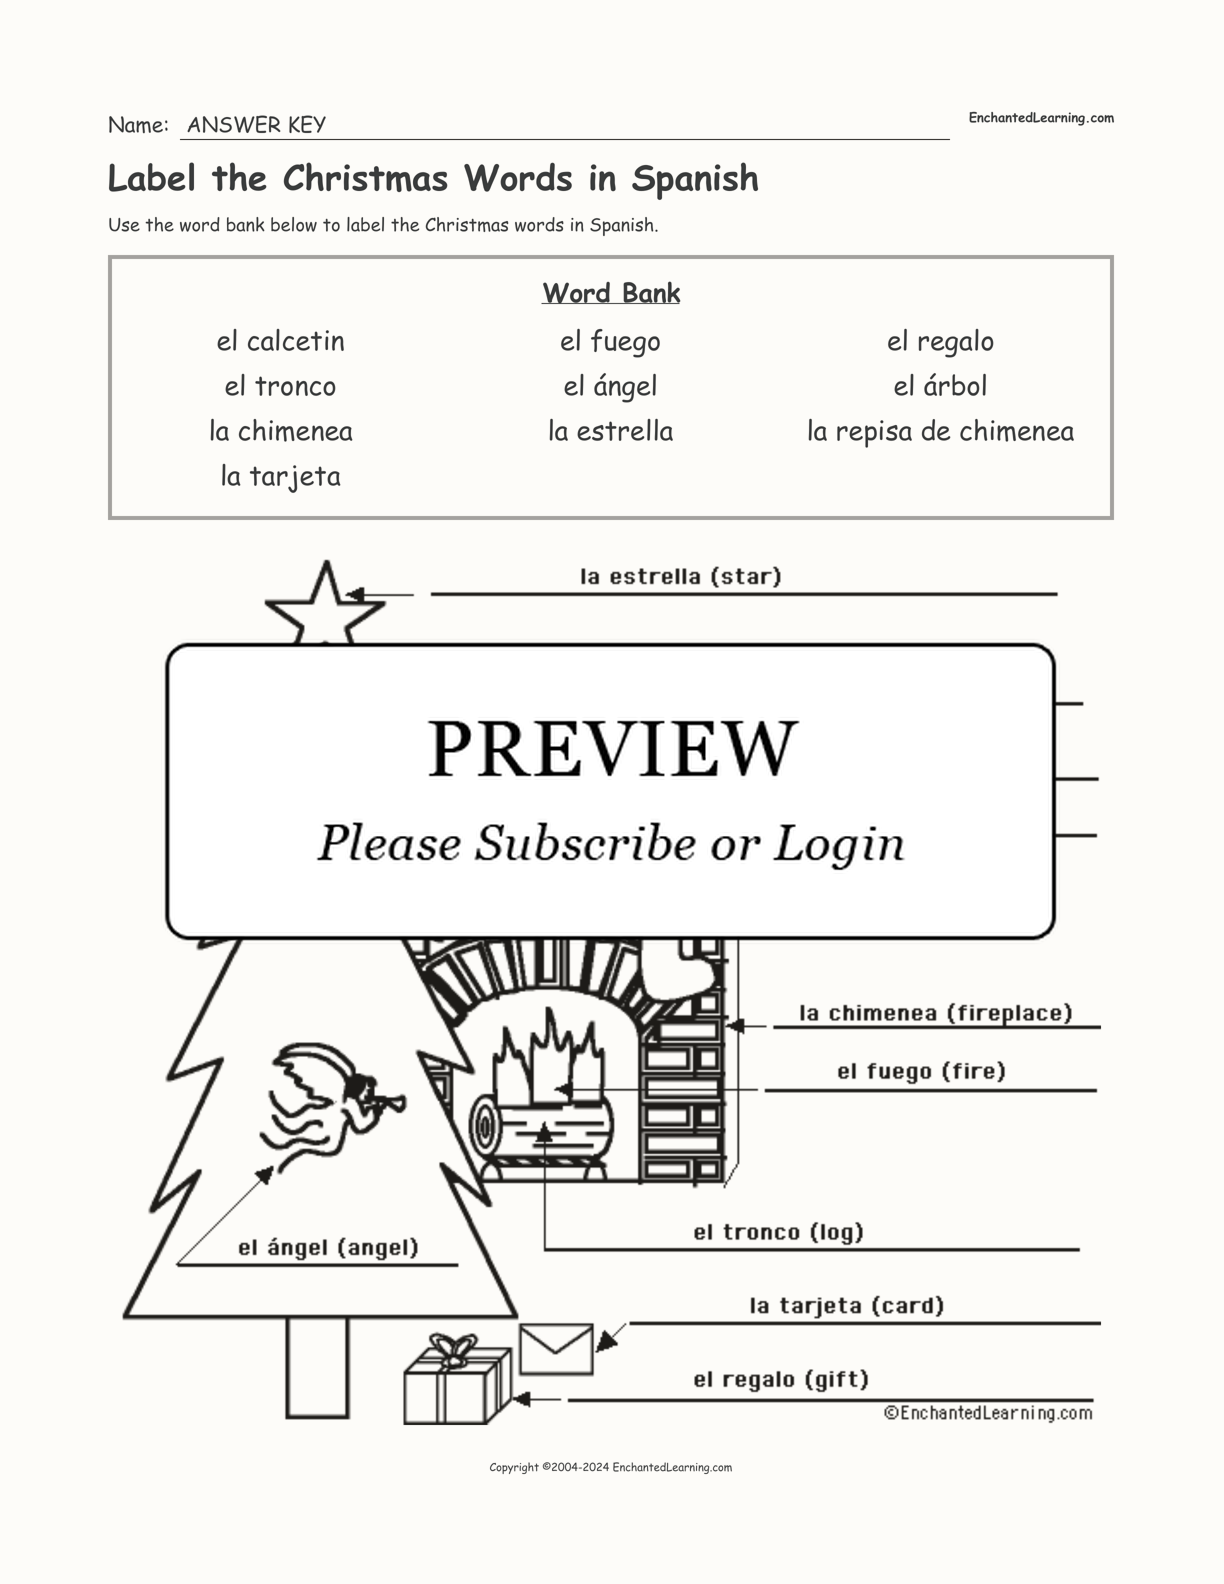 Label the Christmas Words in Spanish interactive worksheet page 2